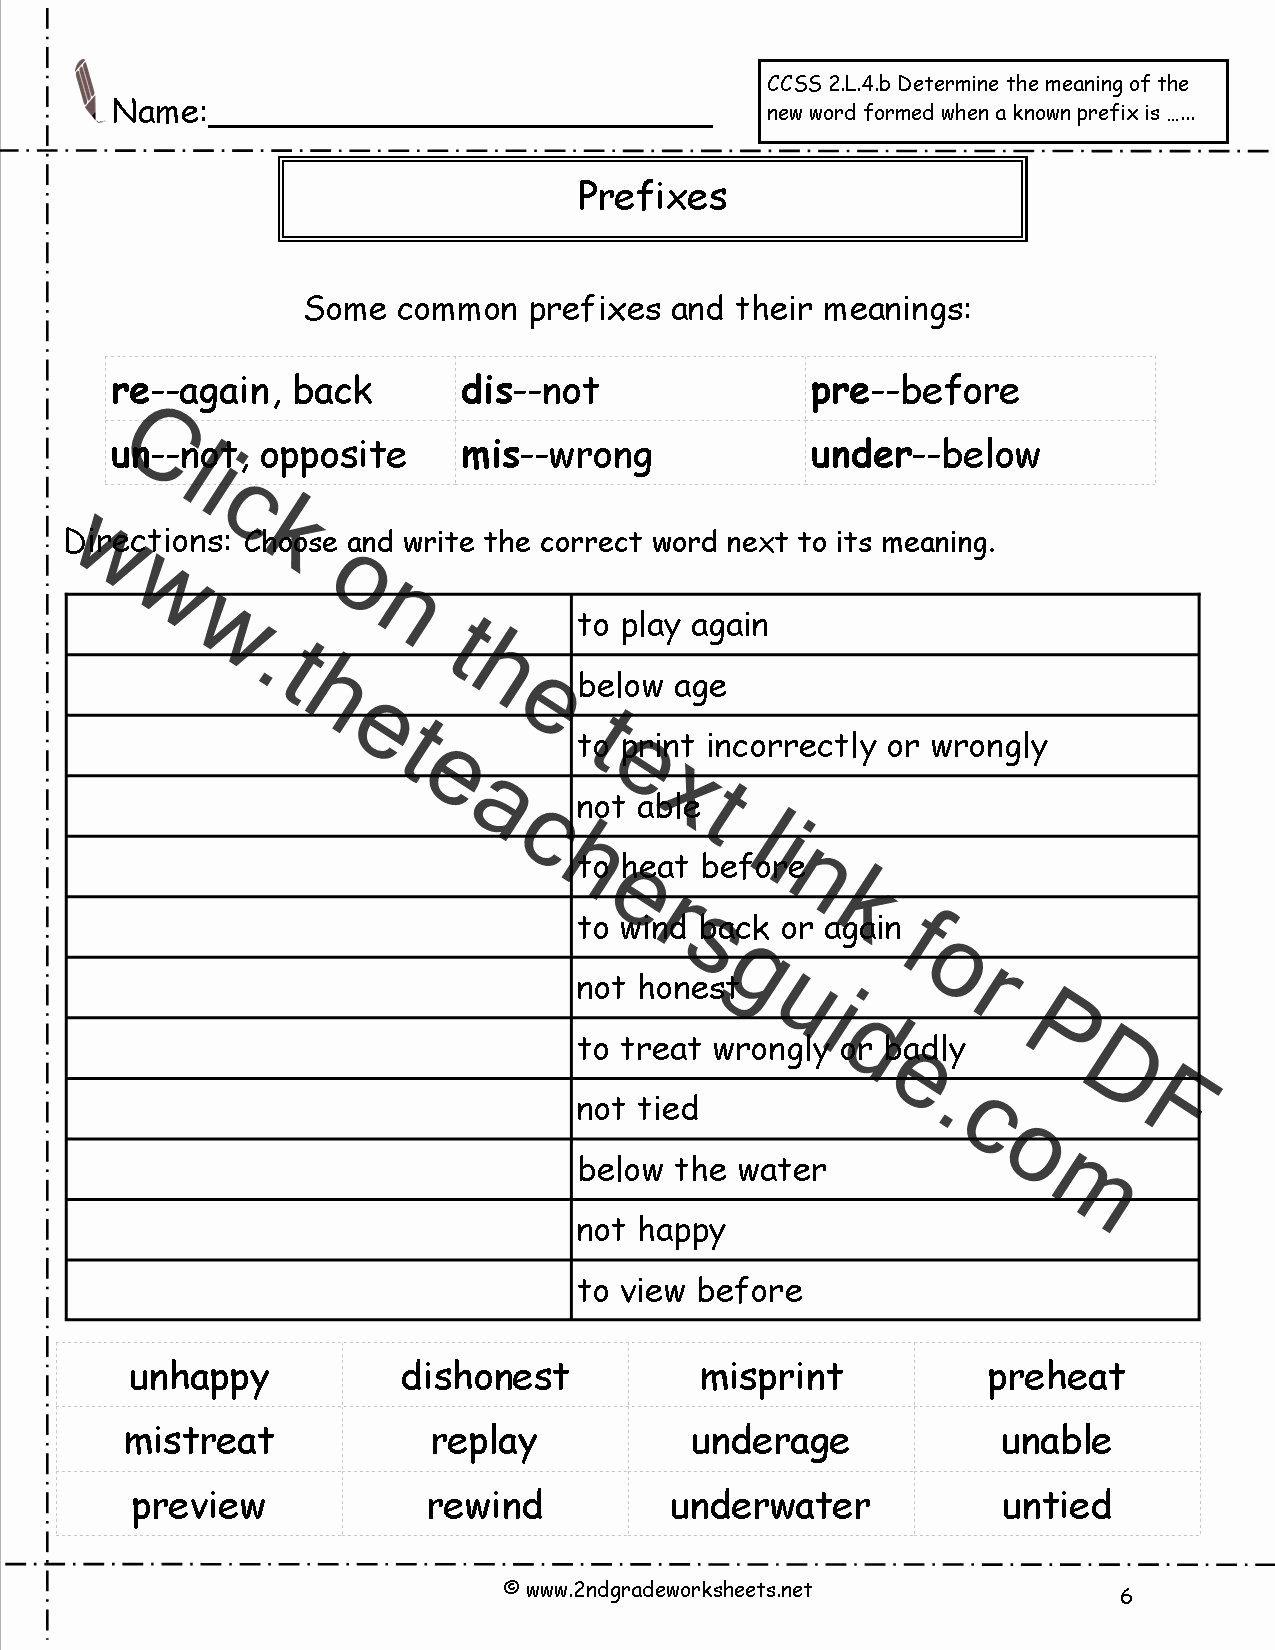 Suffix Worksheets for 4th Grade Inspirational 20 Suffix Worksheets for 4th Grade